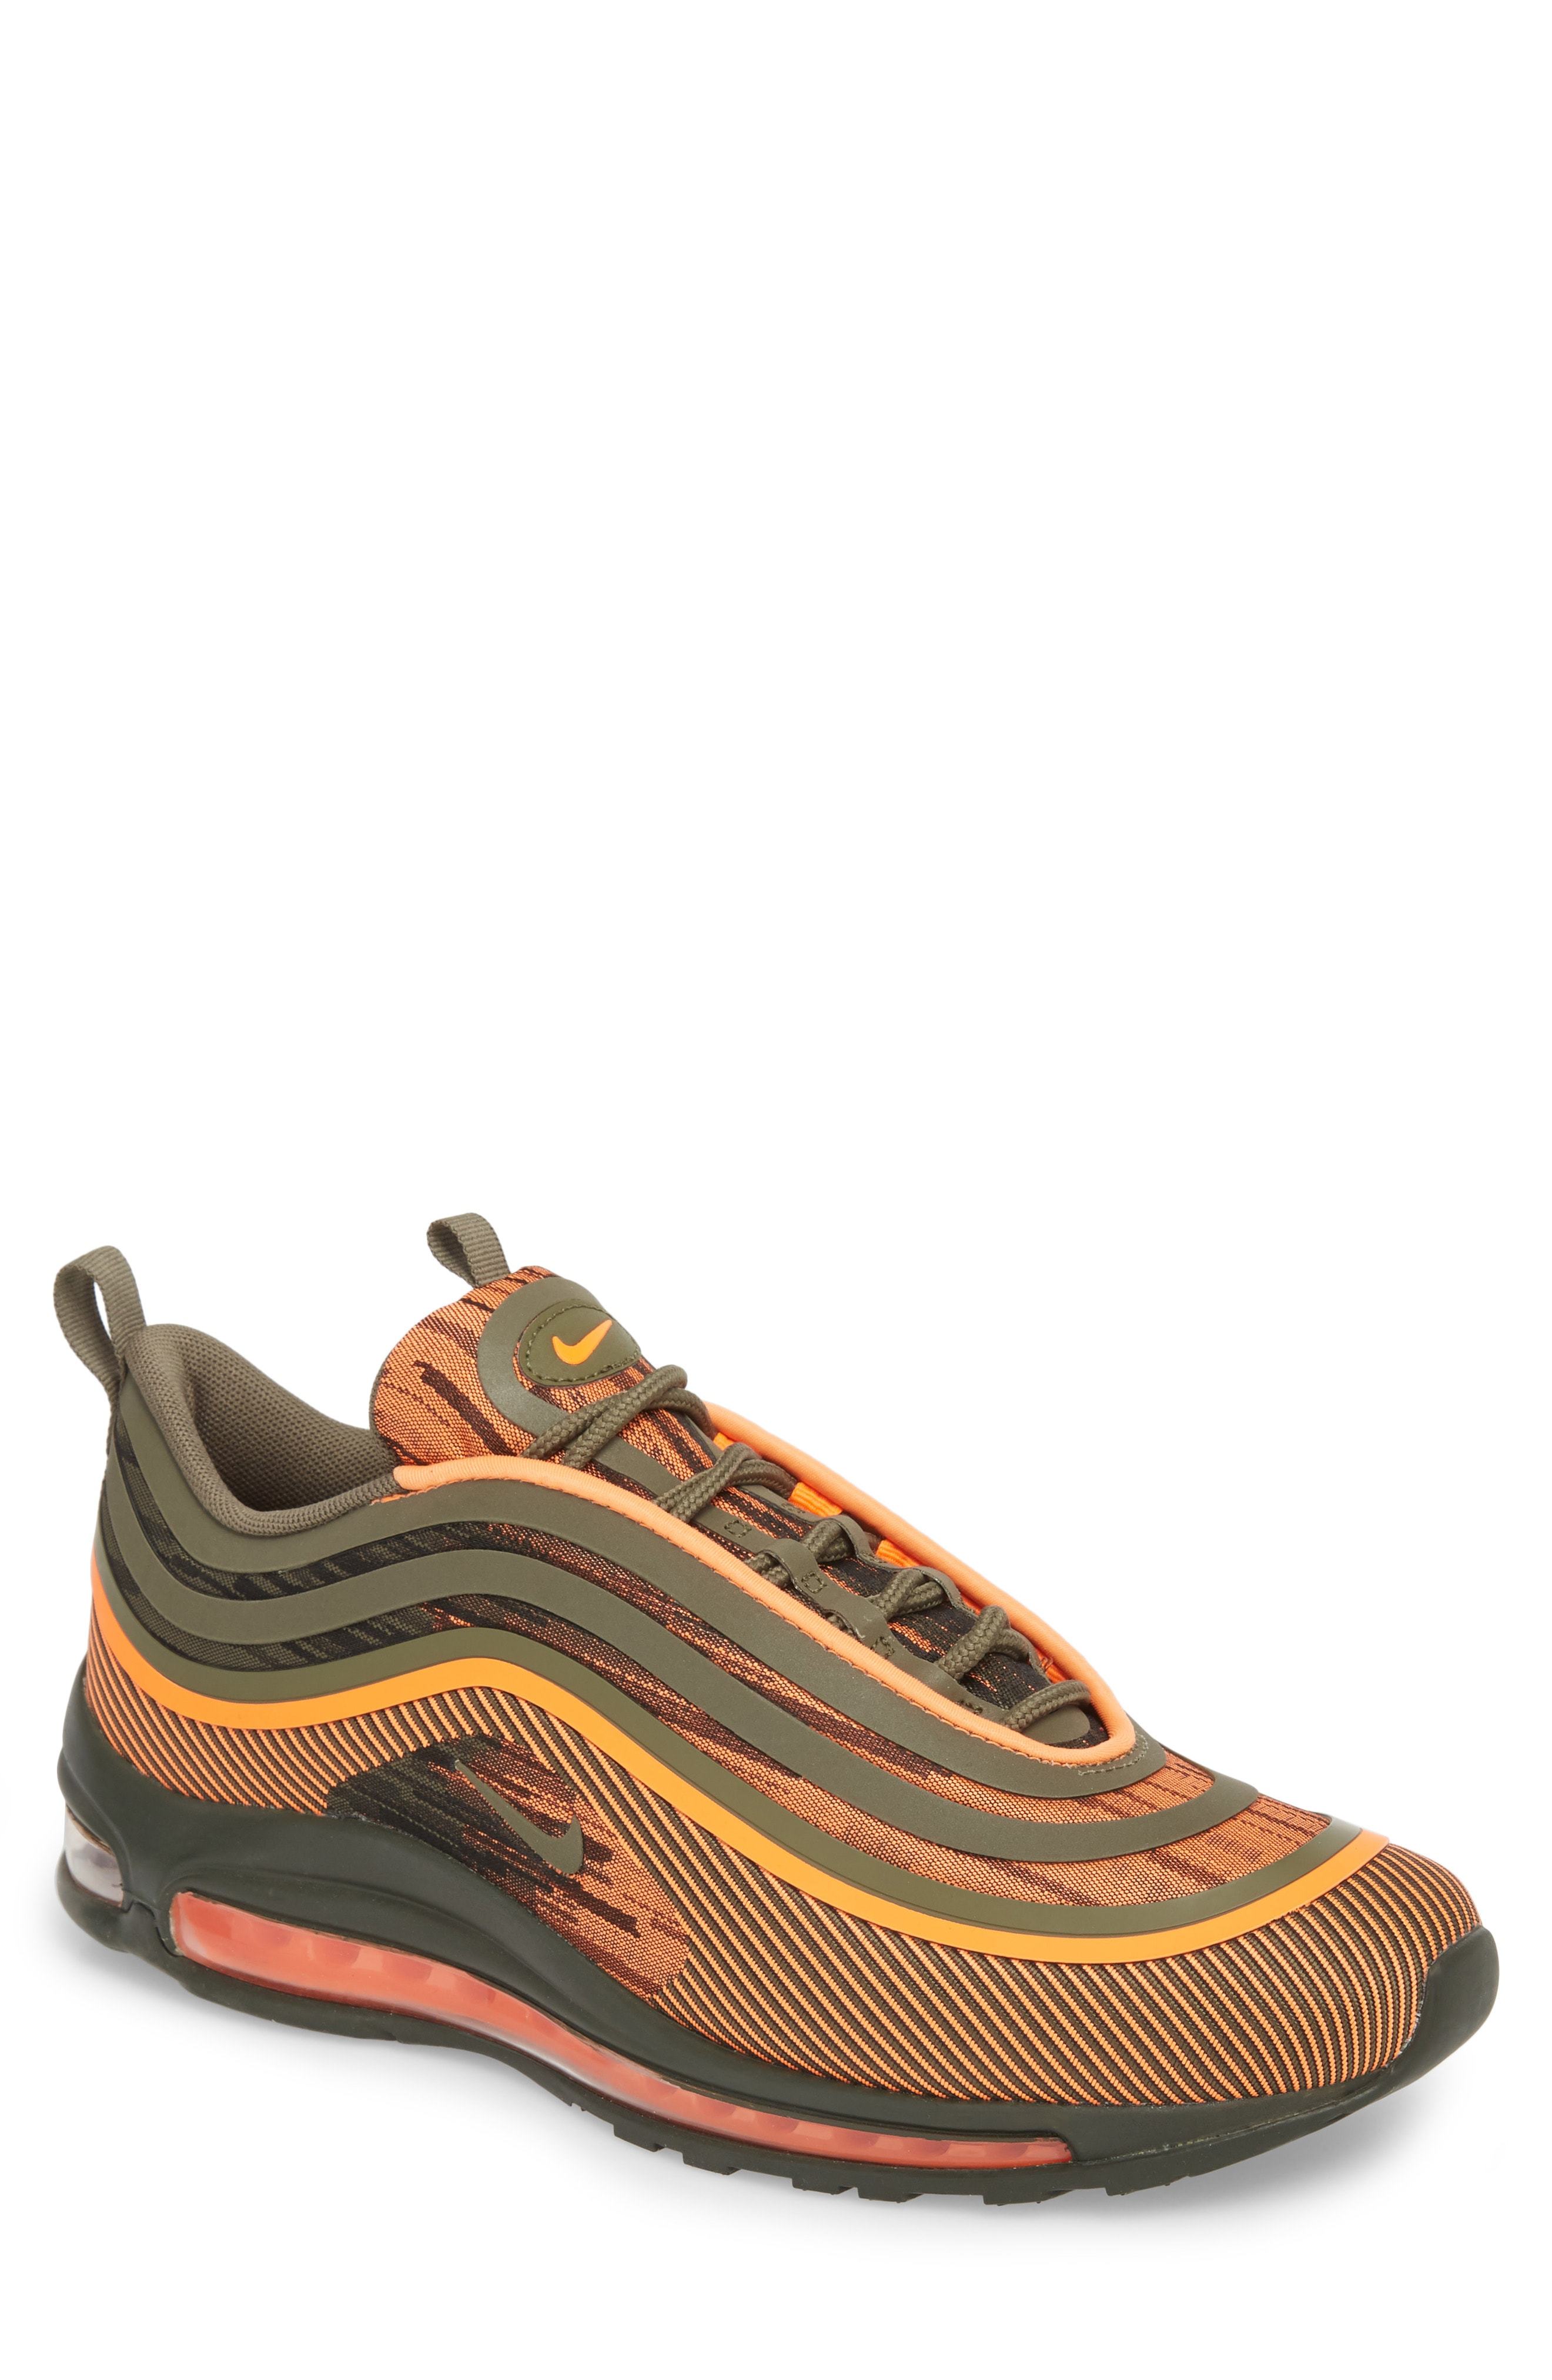 air max 97 olive green and orange